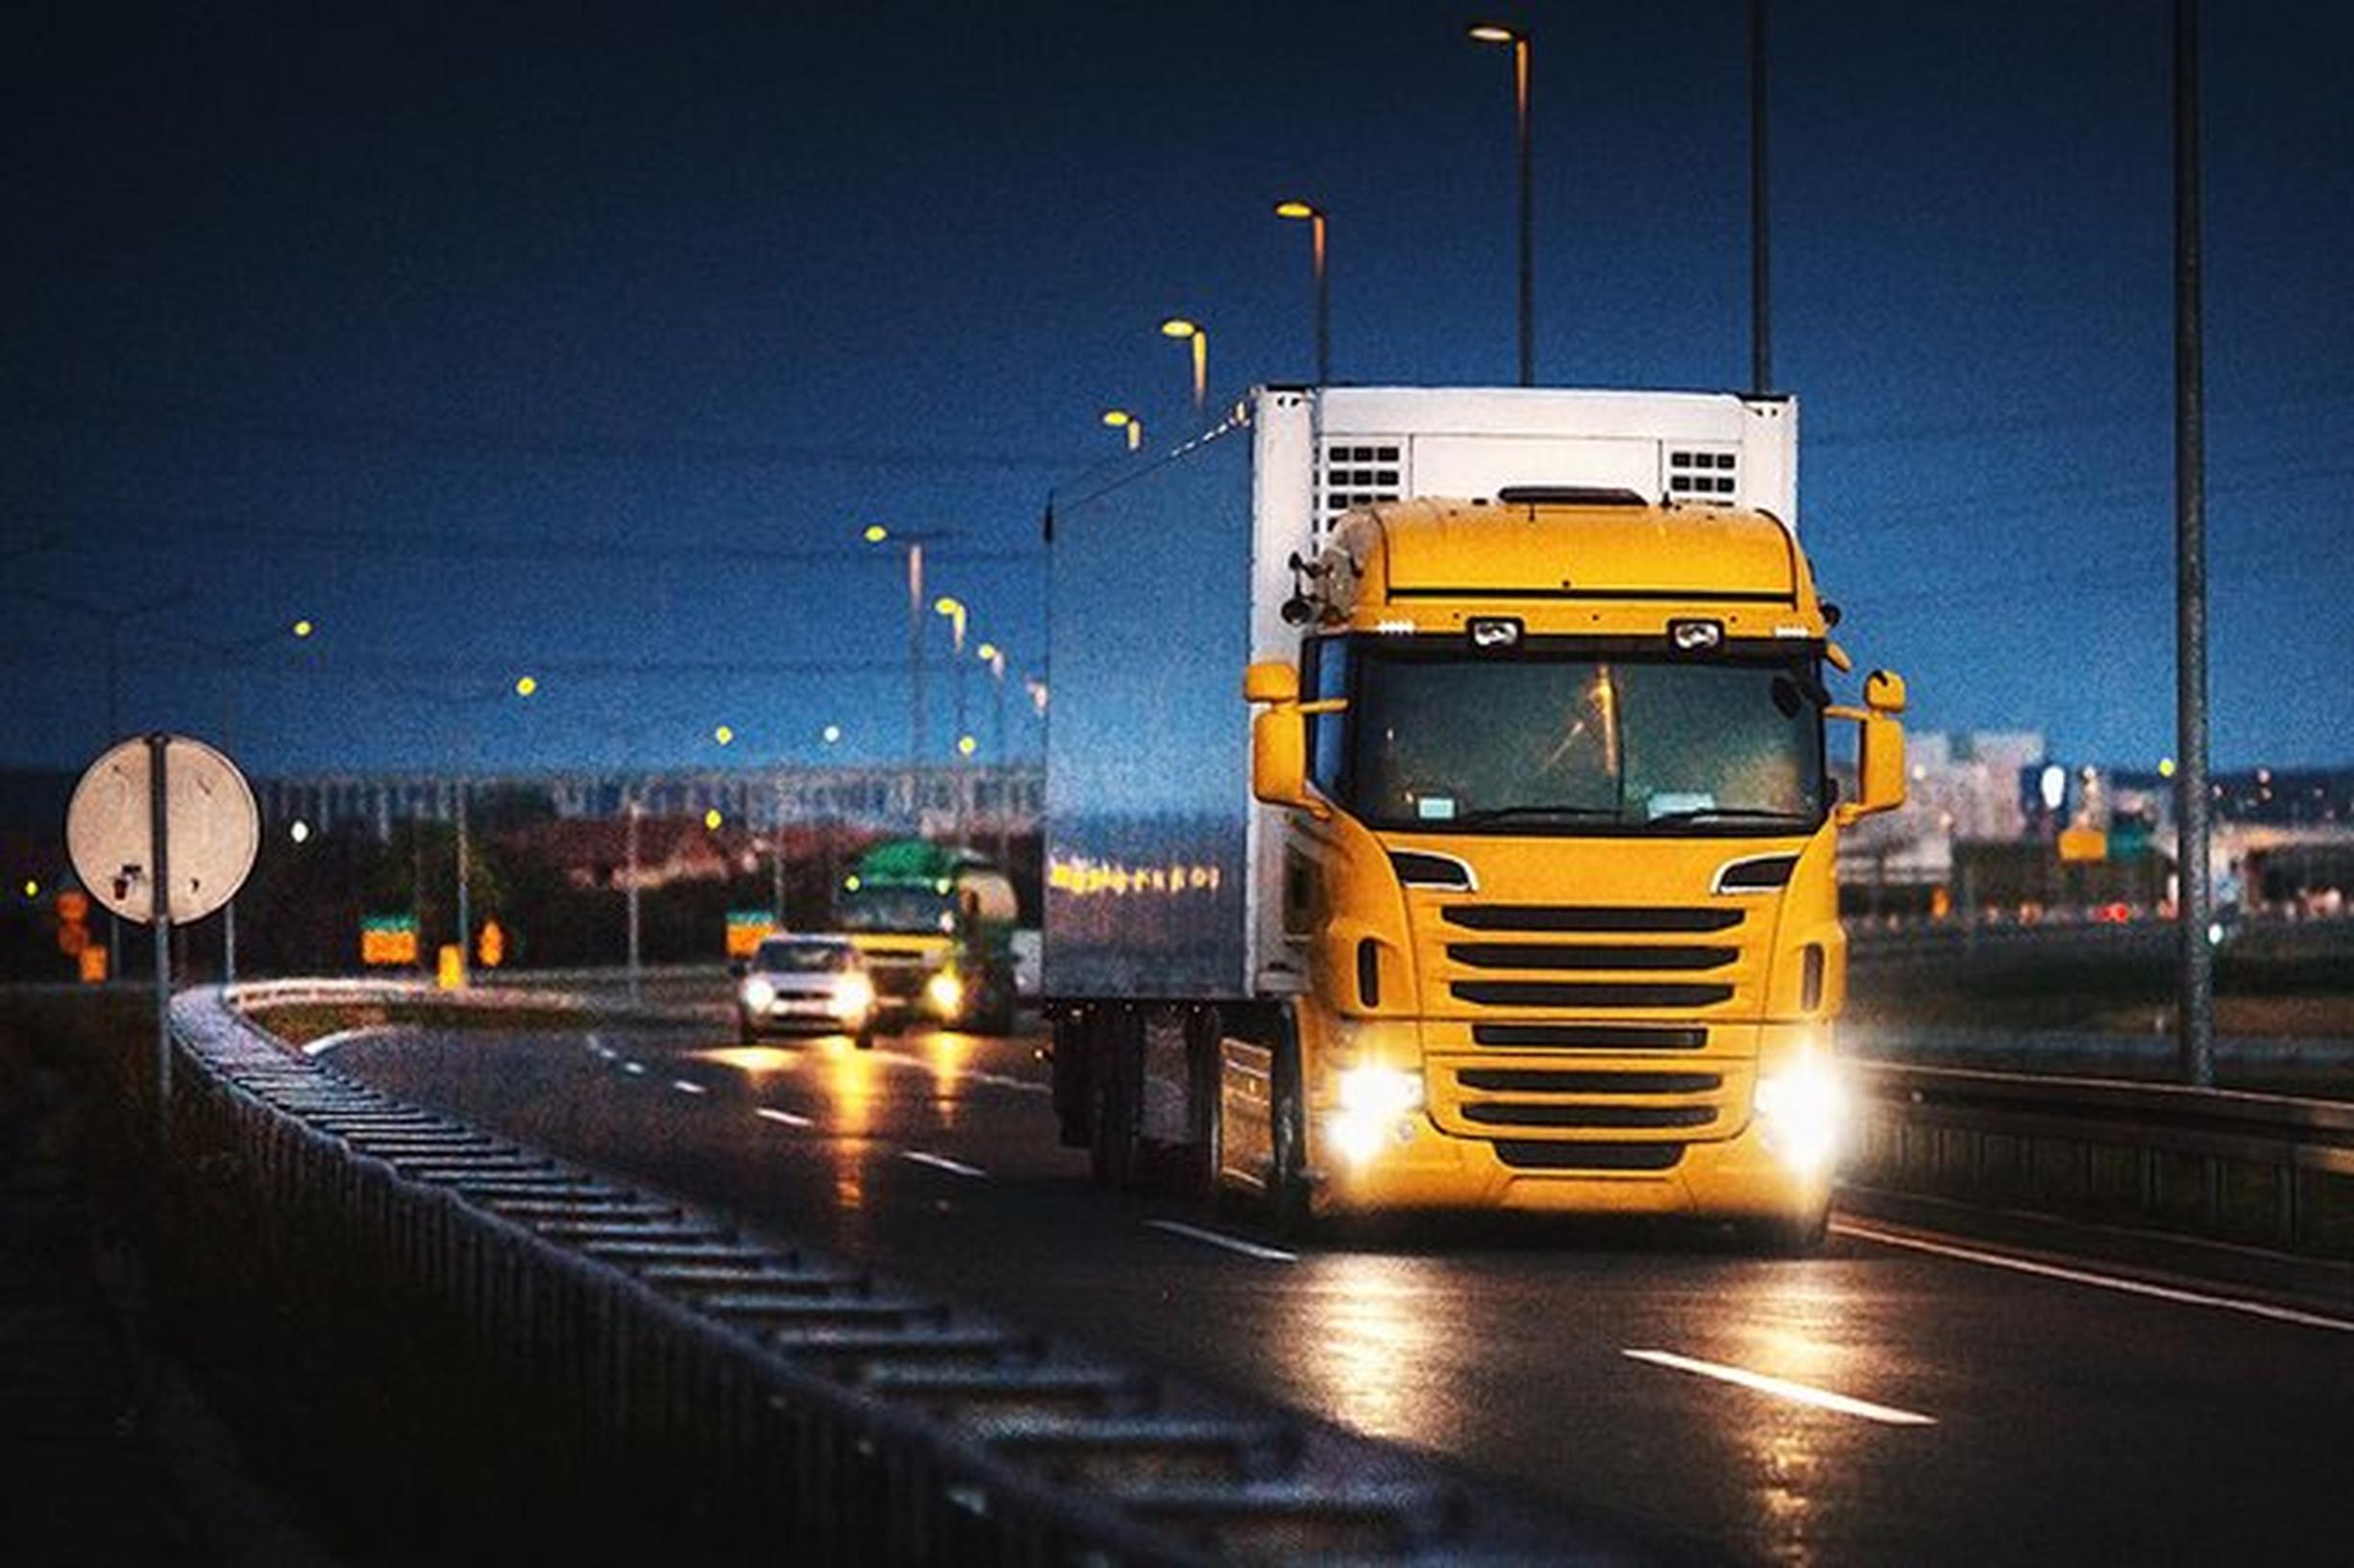 The Road Haulage Association estimates there is now a shortage of more than 100,000 drivers in the UK